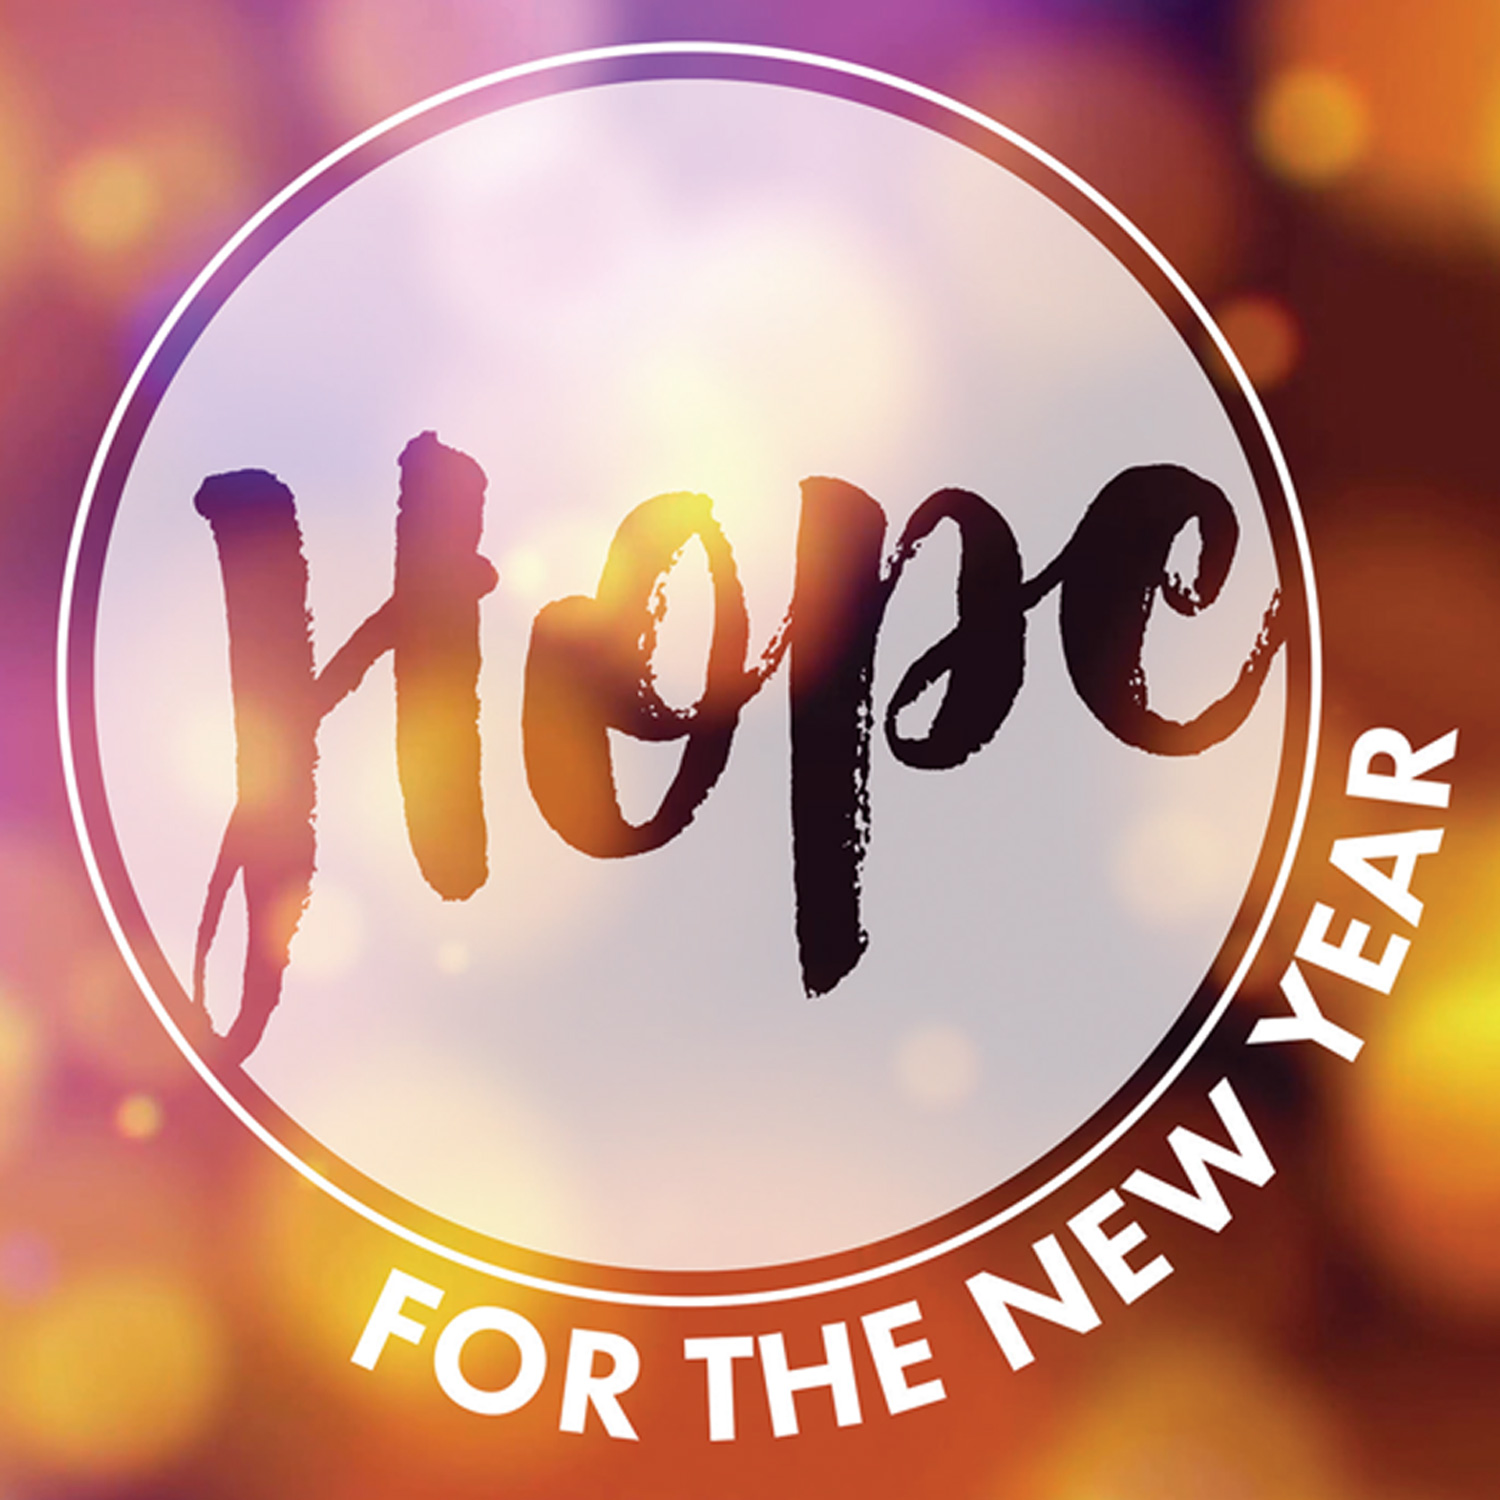 Hope for the New Year